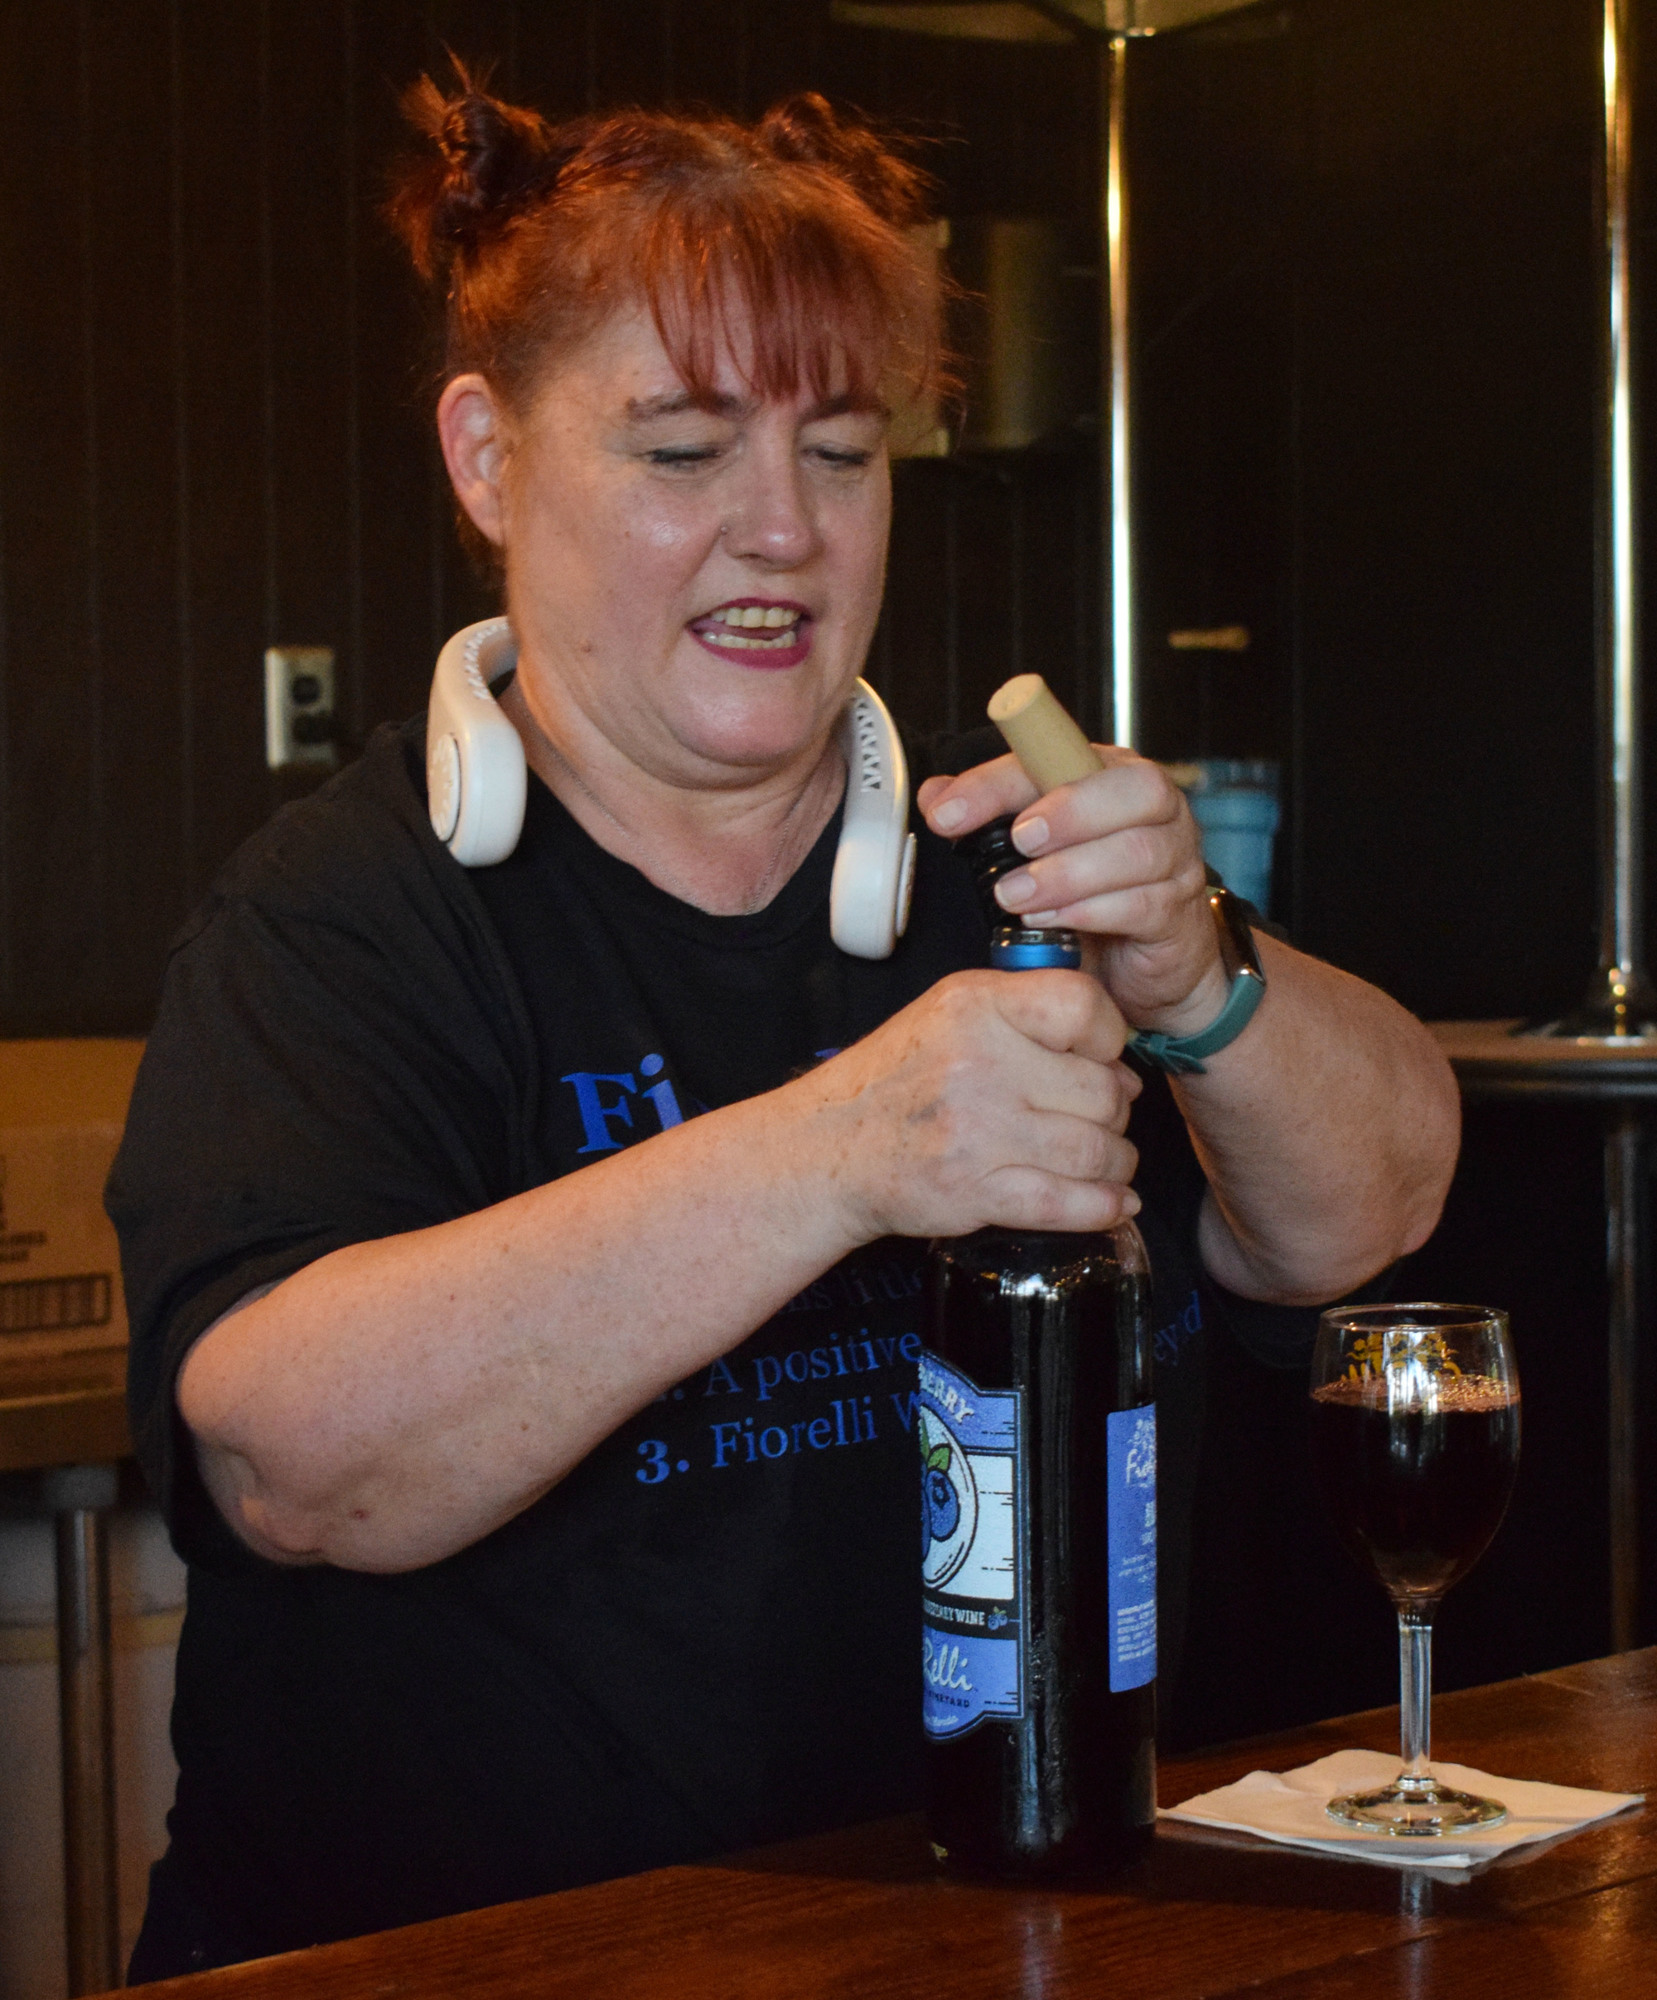 Lisa Gaines, a bartender at Fiorelli Winery and Vineyard, serves a guest a glass of wine.